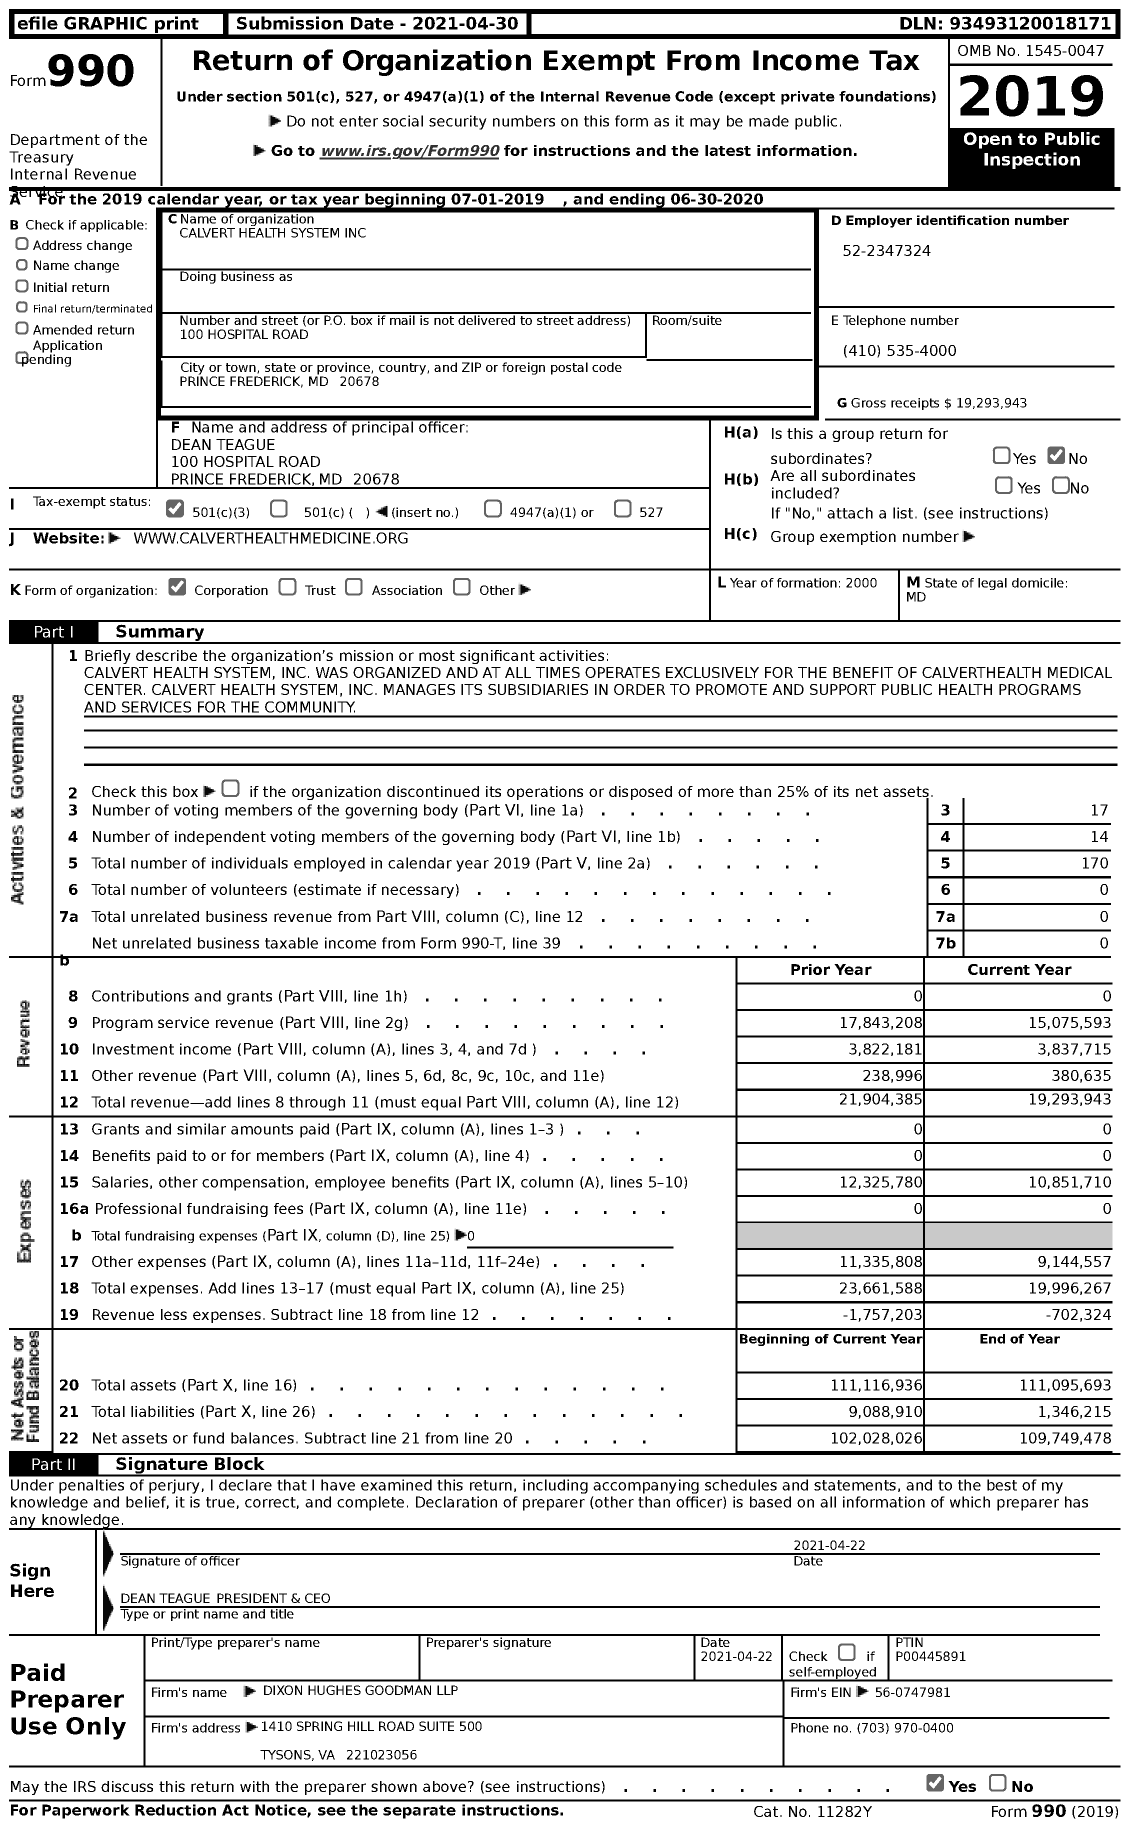 Image of first page of 2019 Form 990 for Calvert Health System (CHS)